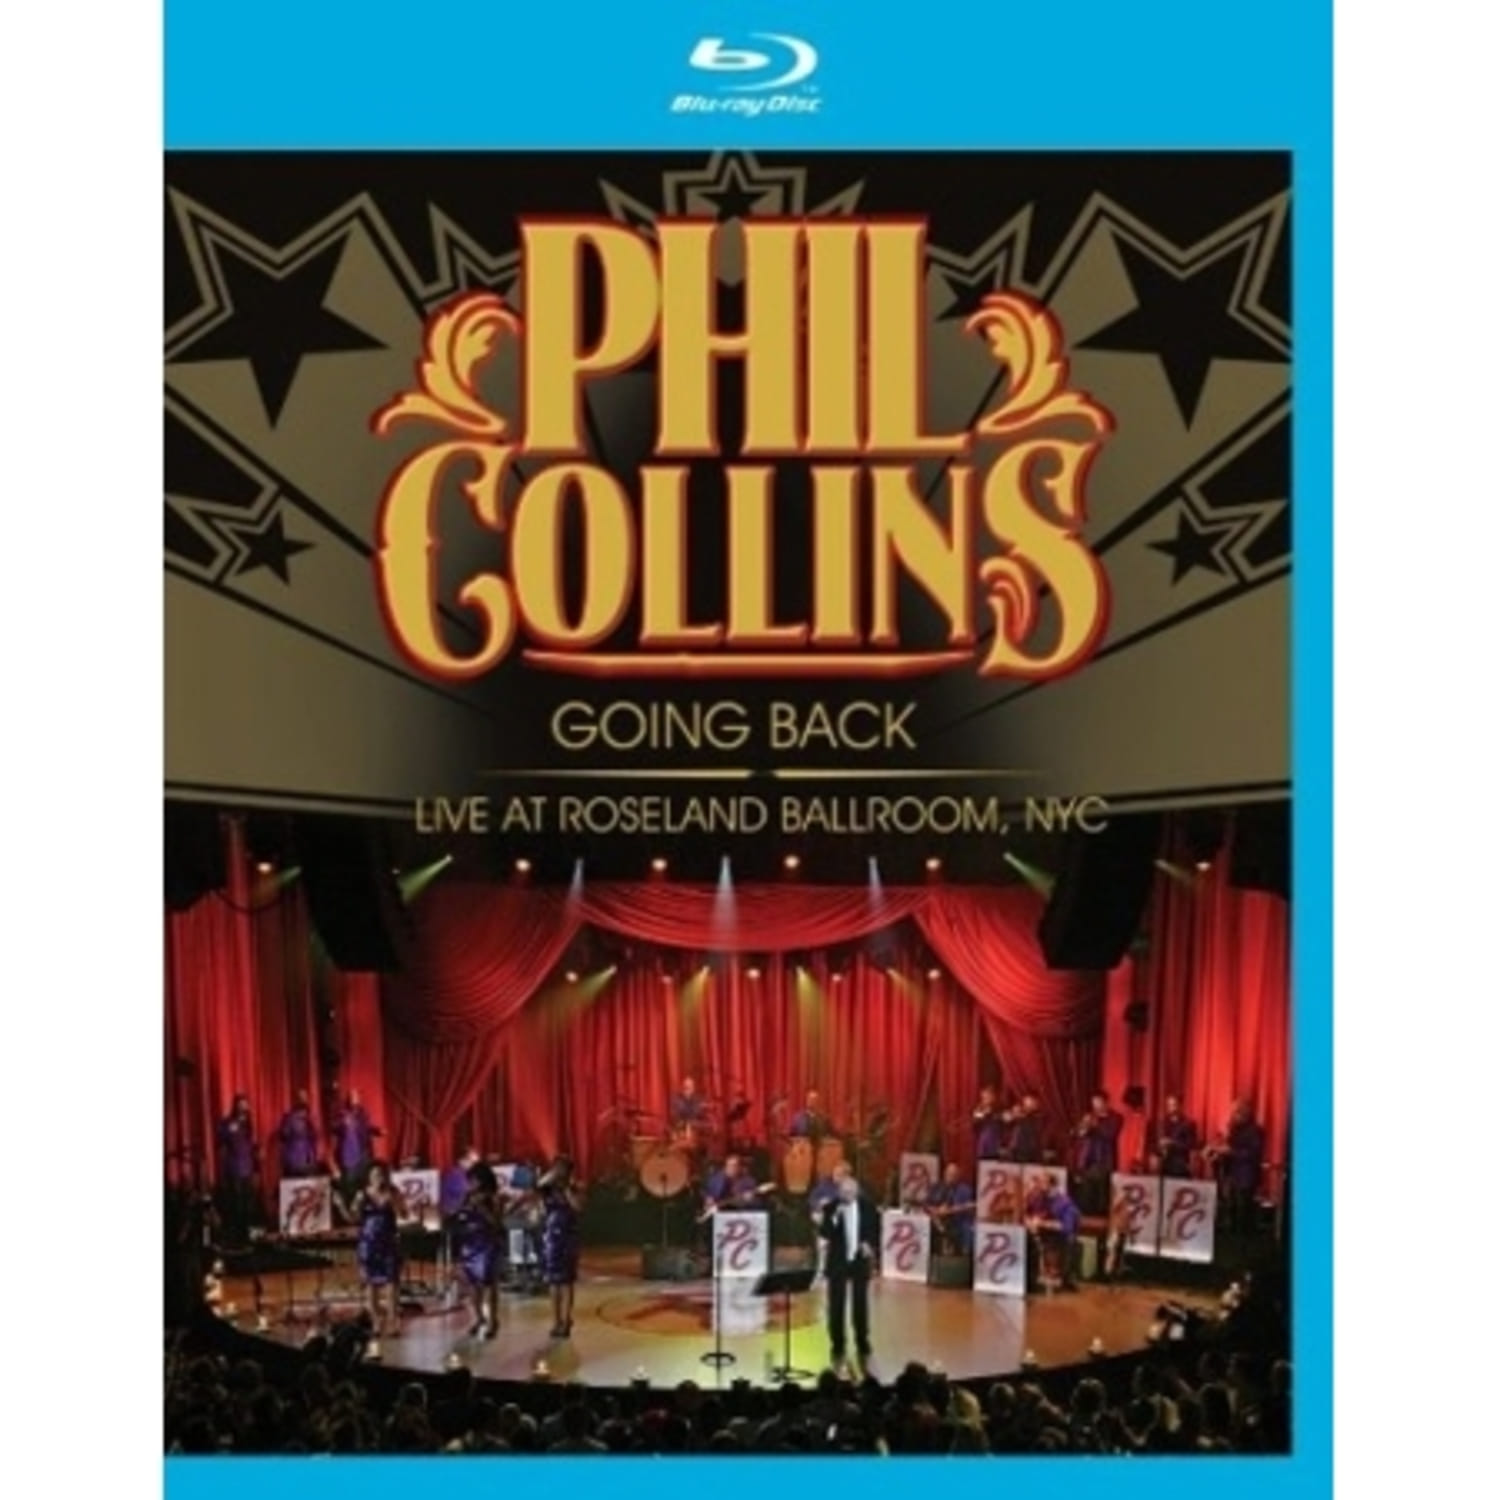 PHIL COLLINS - GOING BACK : LIVE AT ROSELAND BALLROOM, NYC